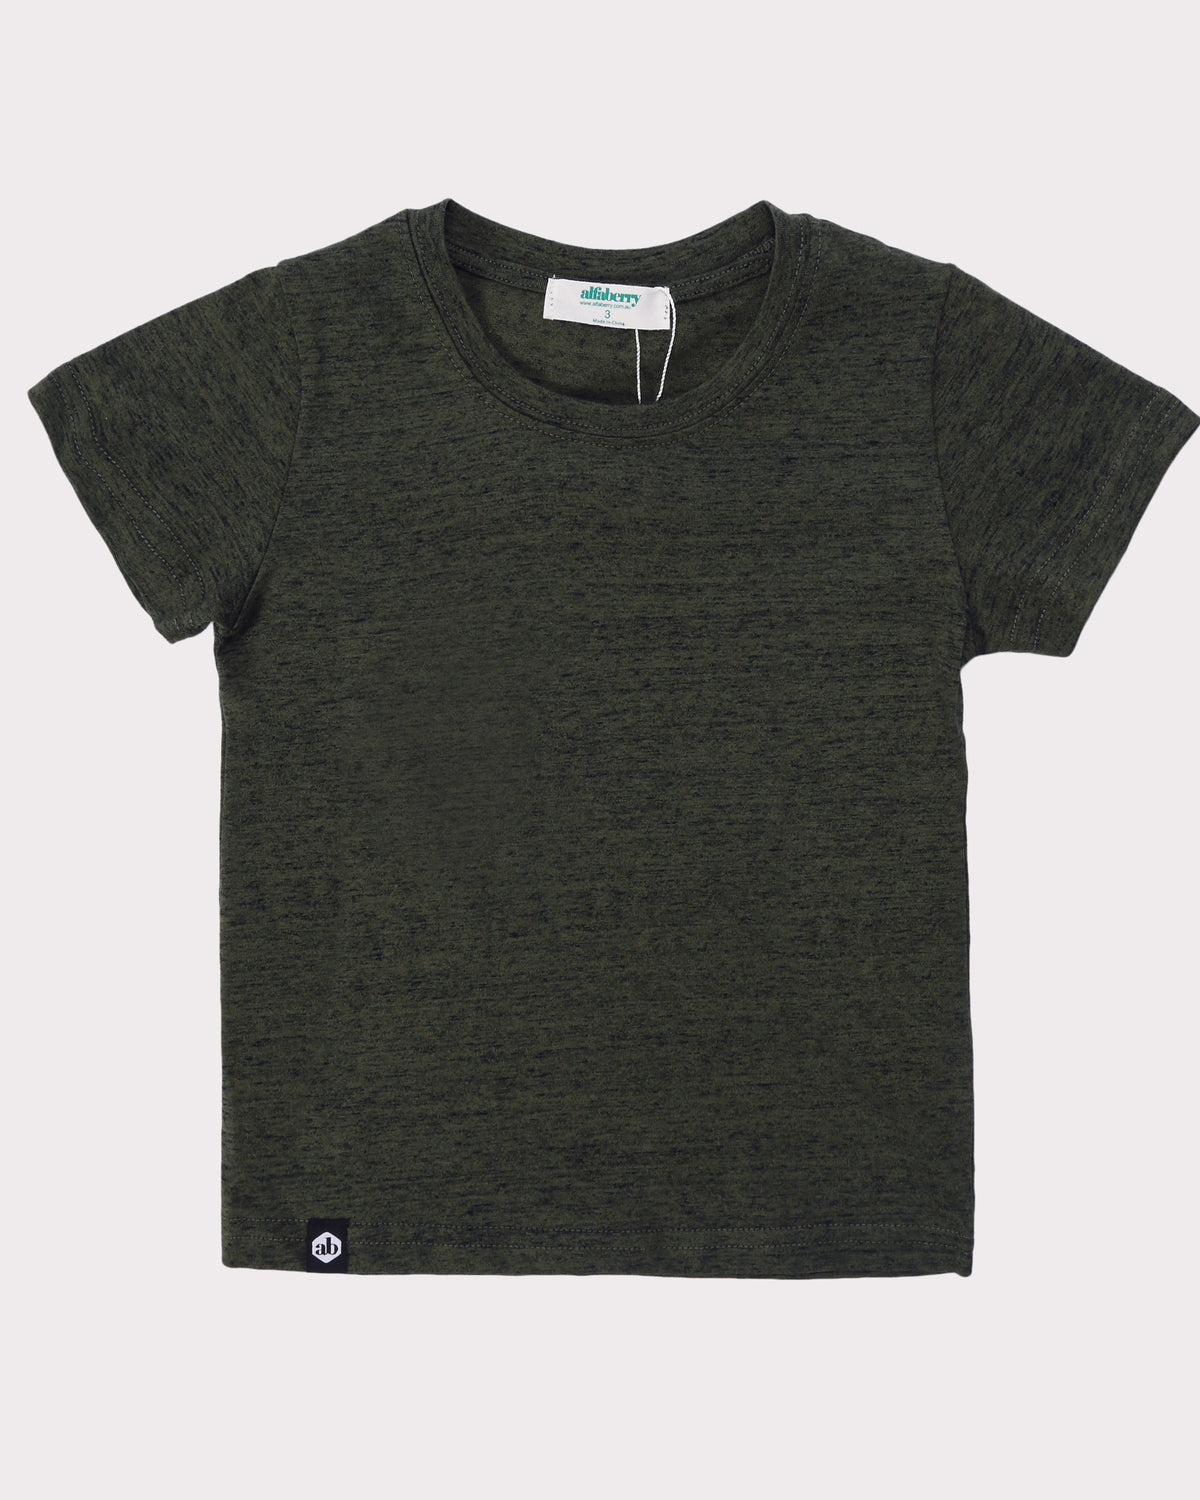 Buddy Tee Green Front